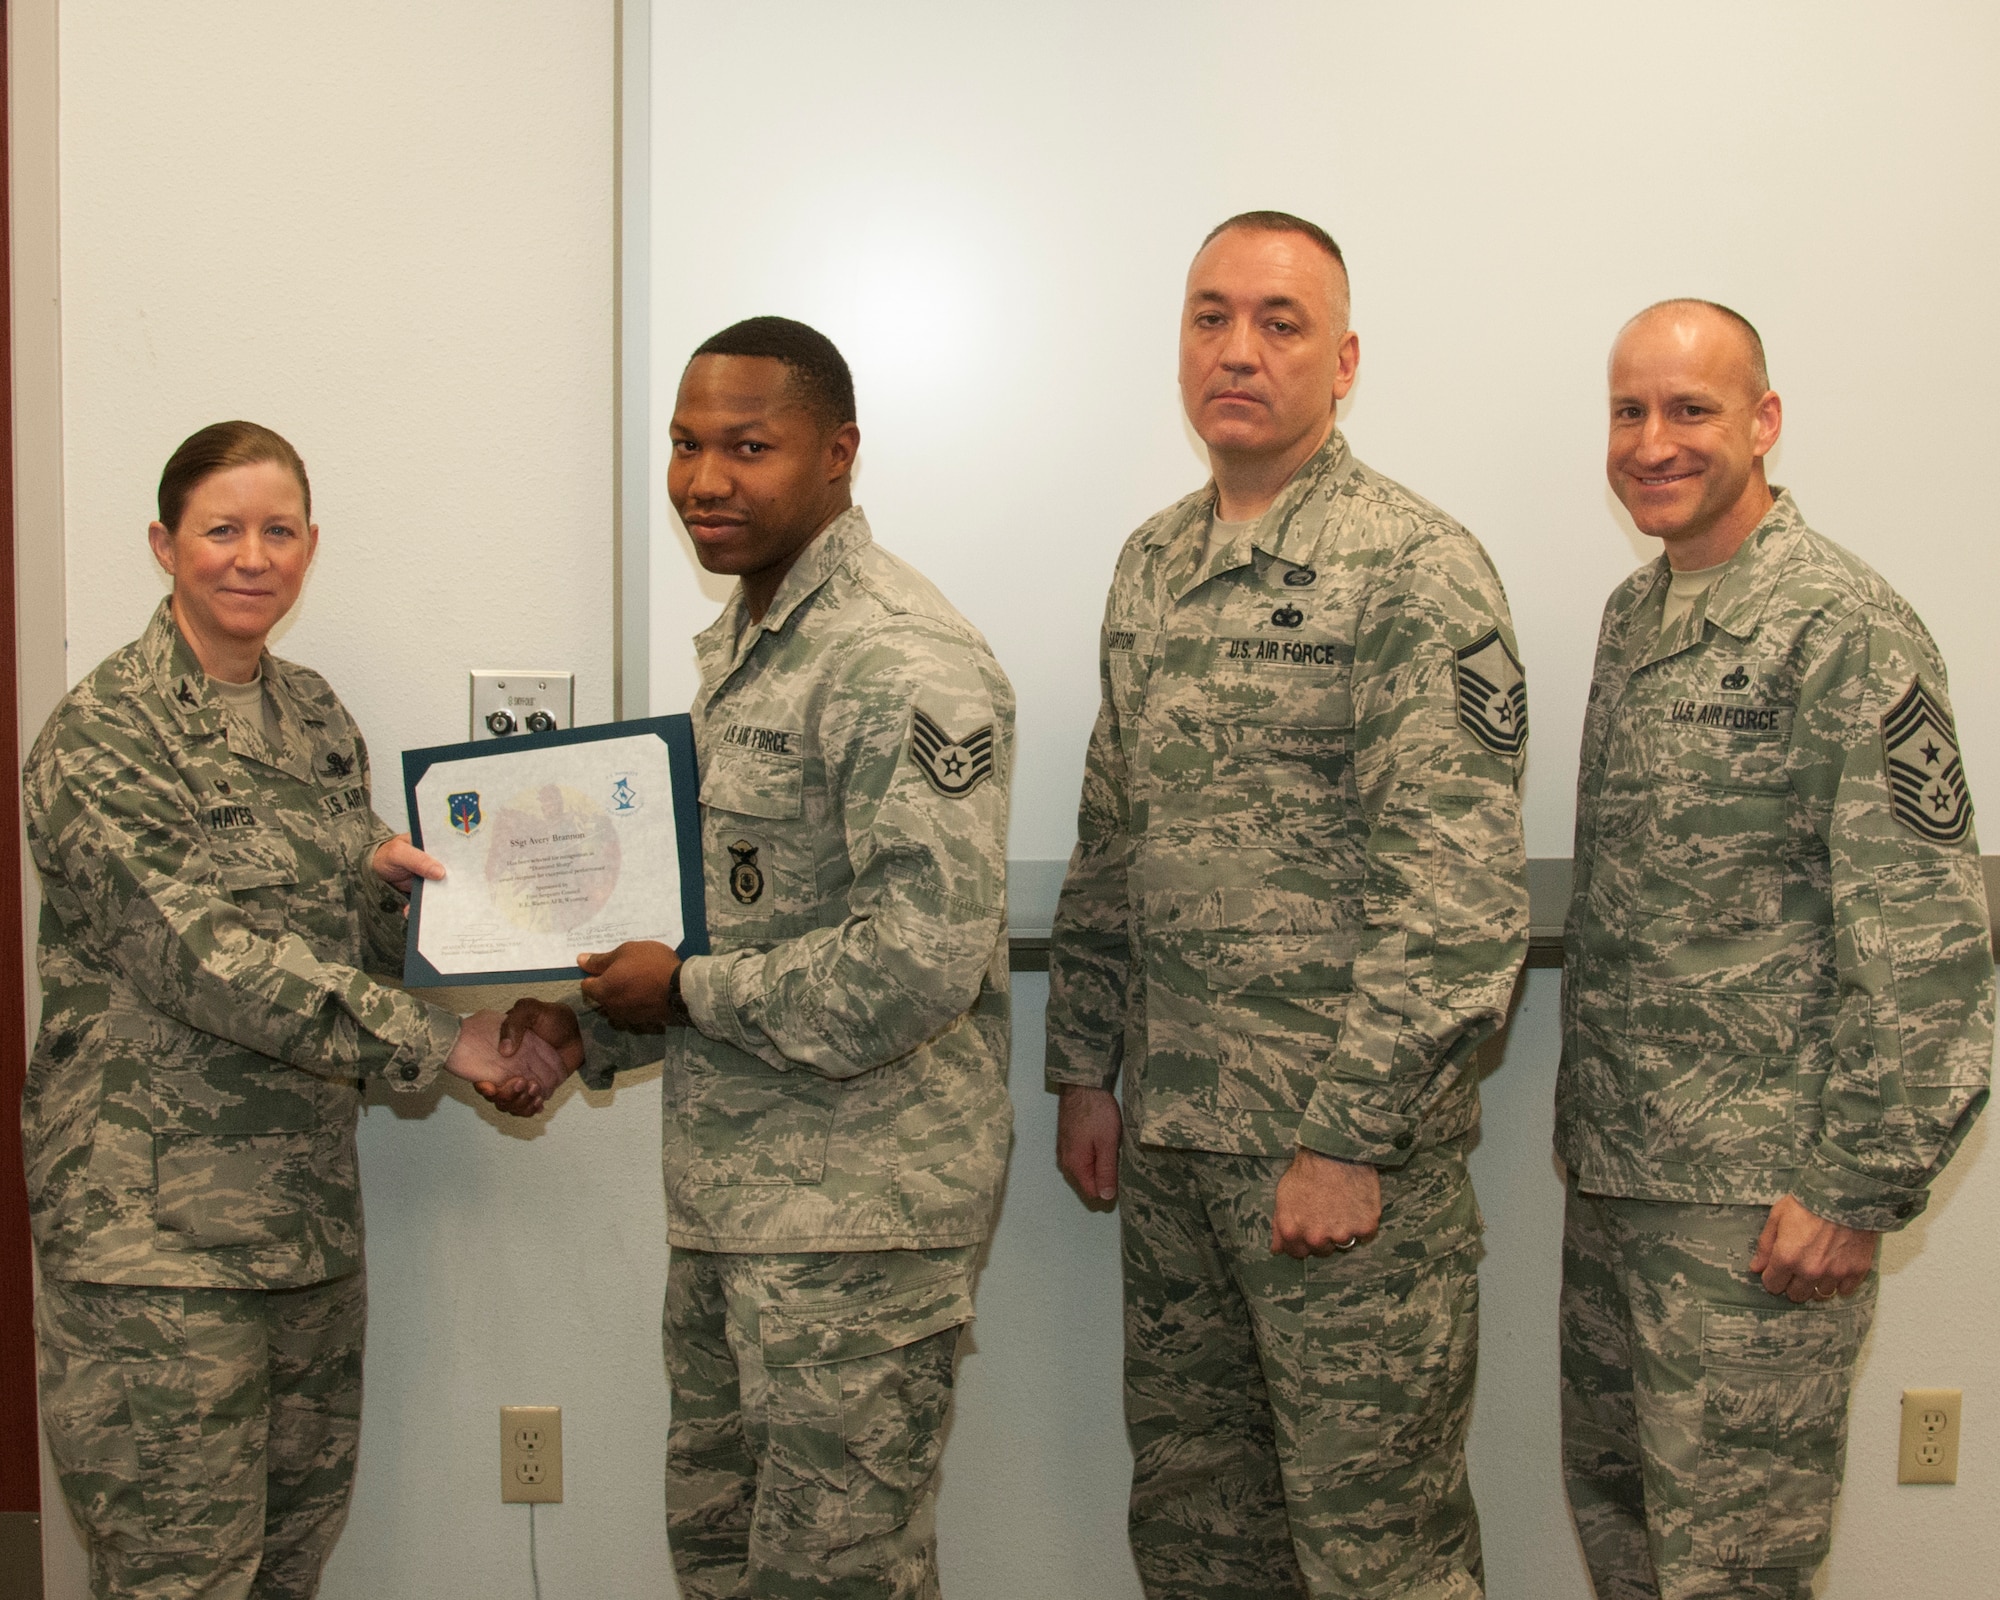 Staff Sgt. Avery Brannon, 790th Missile Security Forces Squadron Tactical Response Force, poses with Col. Tracey Hayes, 90th Missile Wing commander; Master Sgt. Brian Sartori, 790th MSFS first sergeant; and Chief Master Sgt. Samuel Couch, 90th MW command chief, during the wing's first sergeants' Diamond Sharp Award presentation May 12, 2015, on F.E. Warren Air Force Base, Wyo. First sergeants nominate an Airman in their respective squadrons for the award, and the first sergeants select the three top contenders for the award each month. (U.S. Air Force photo by Senior Airman Jason Wiese)